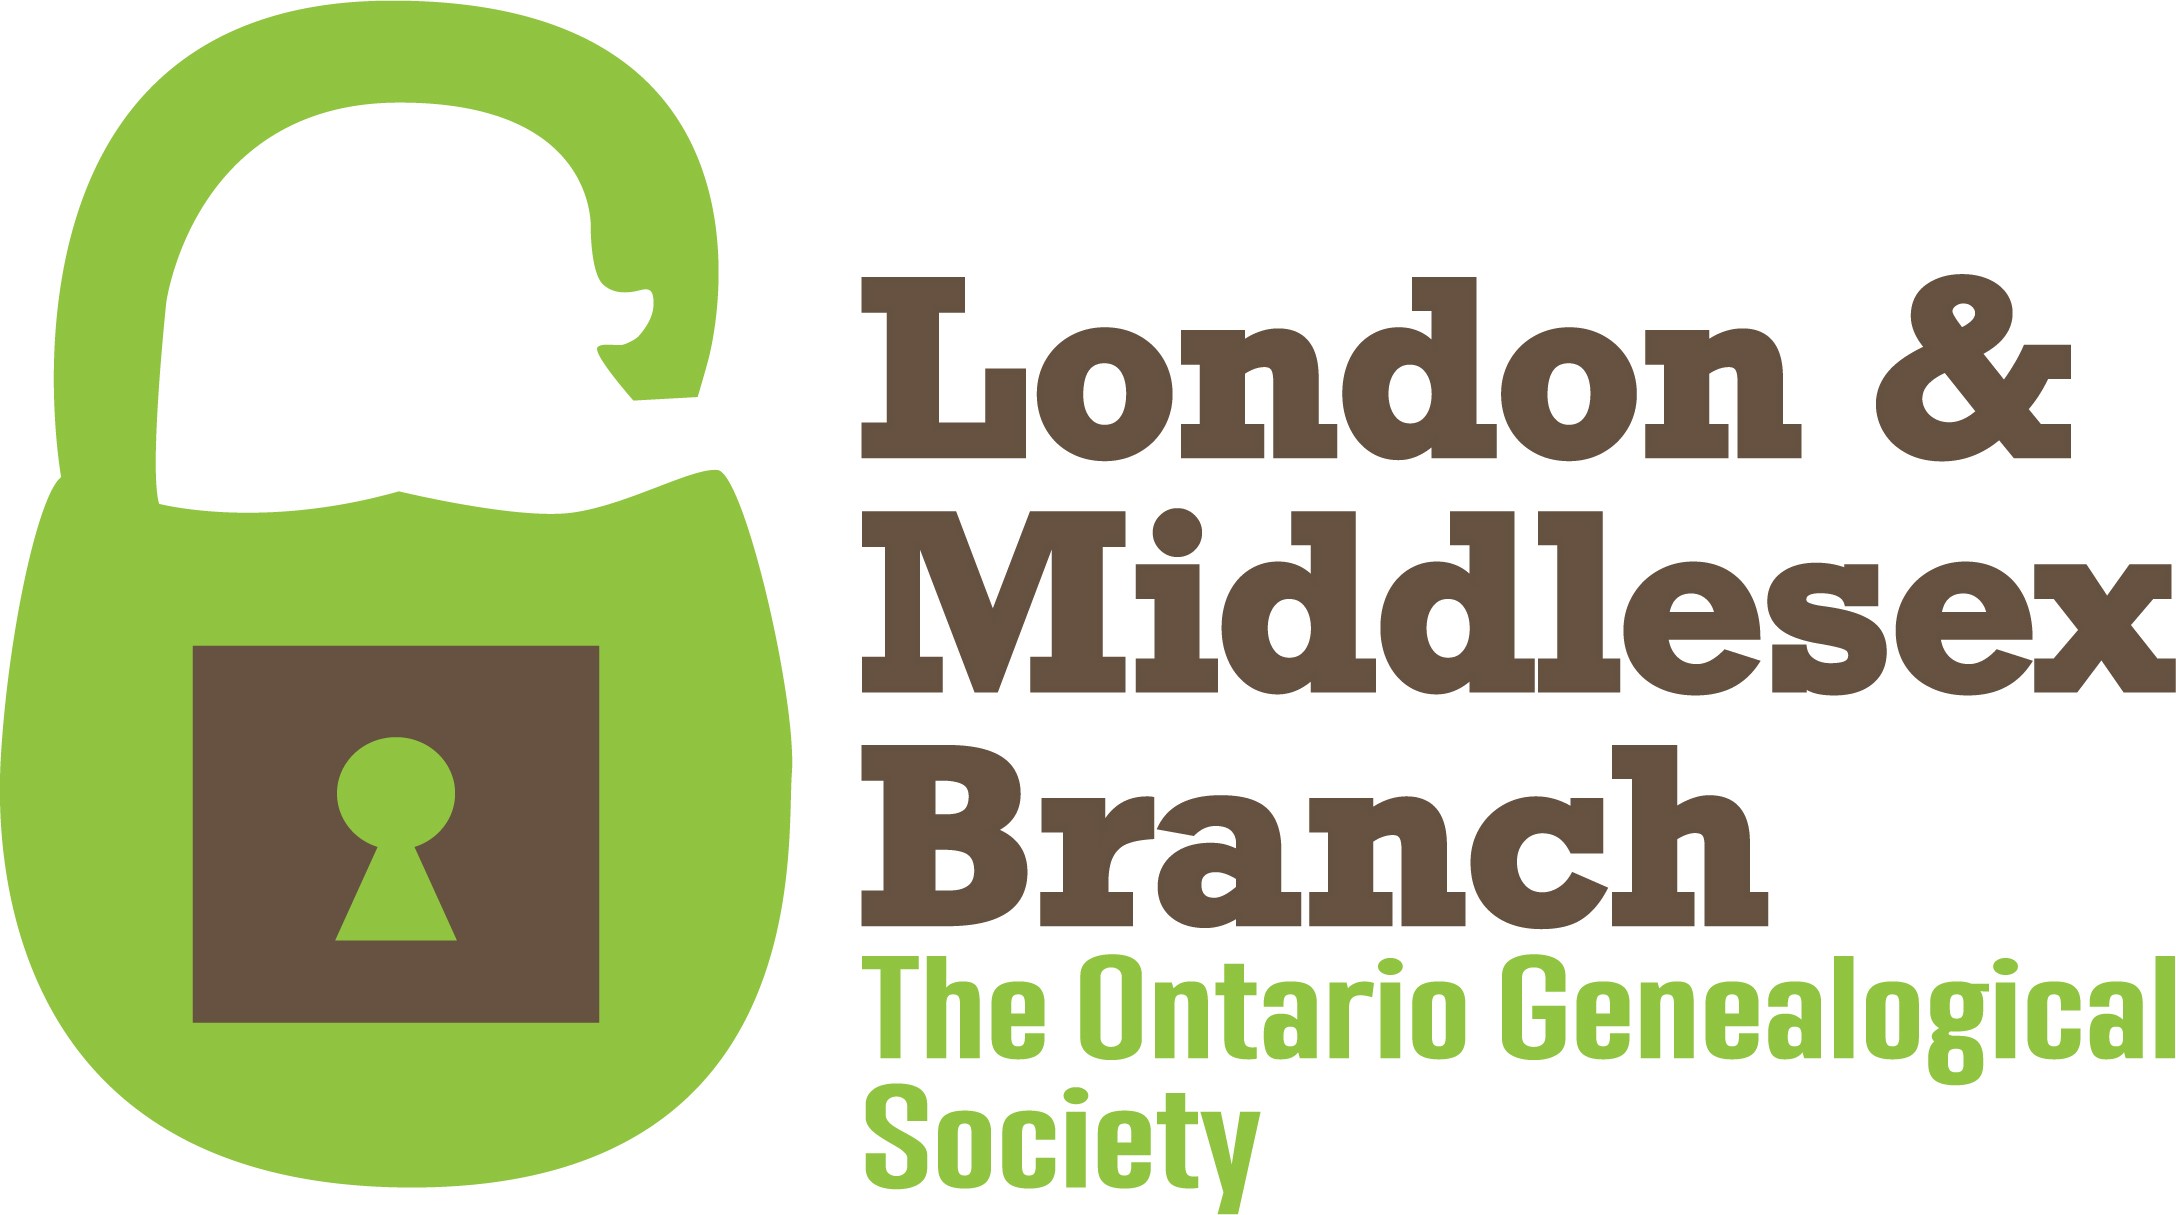 London and Middlesex Branch, The Ontario Genealogical Society